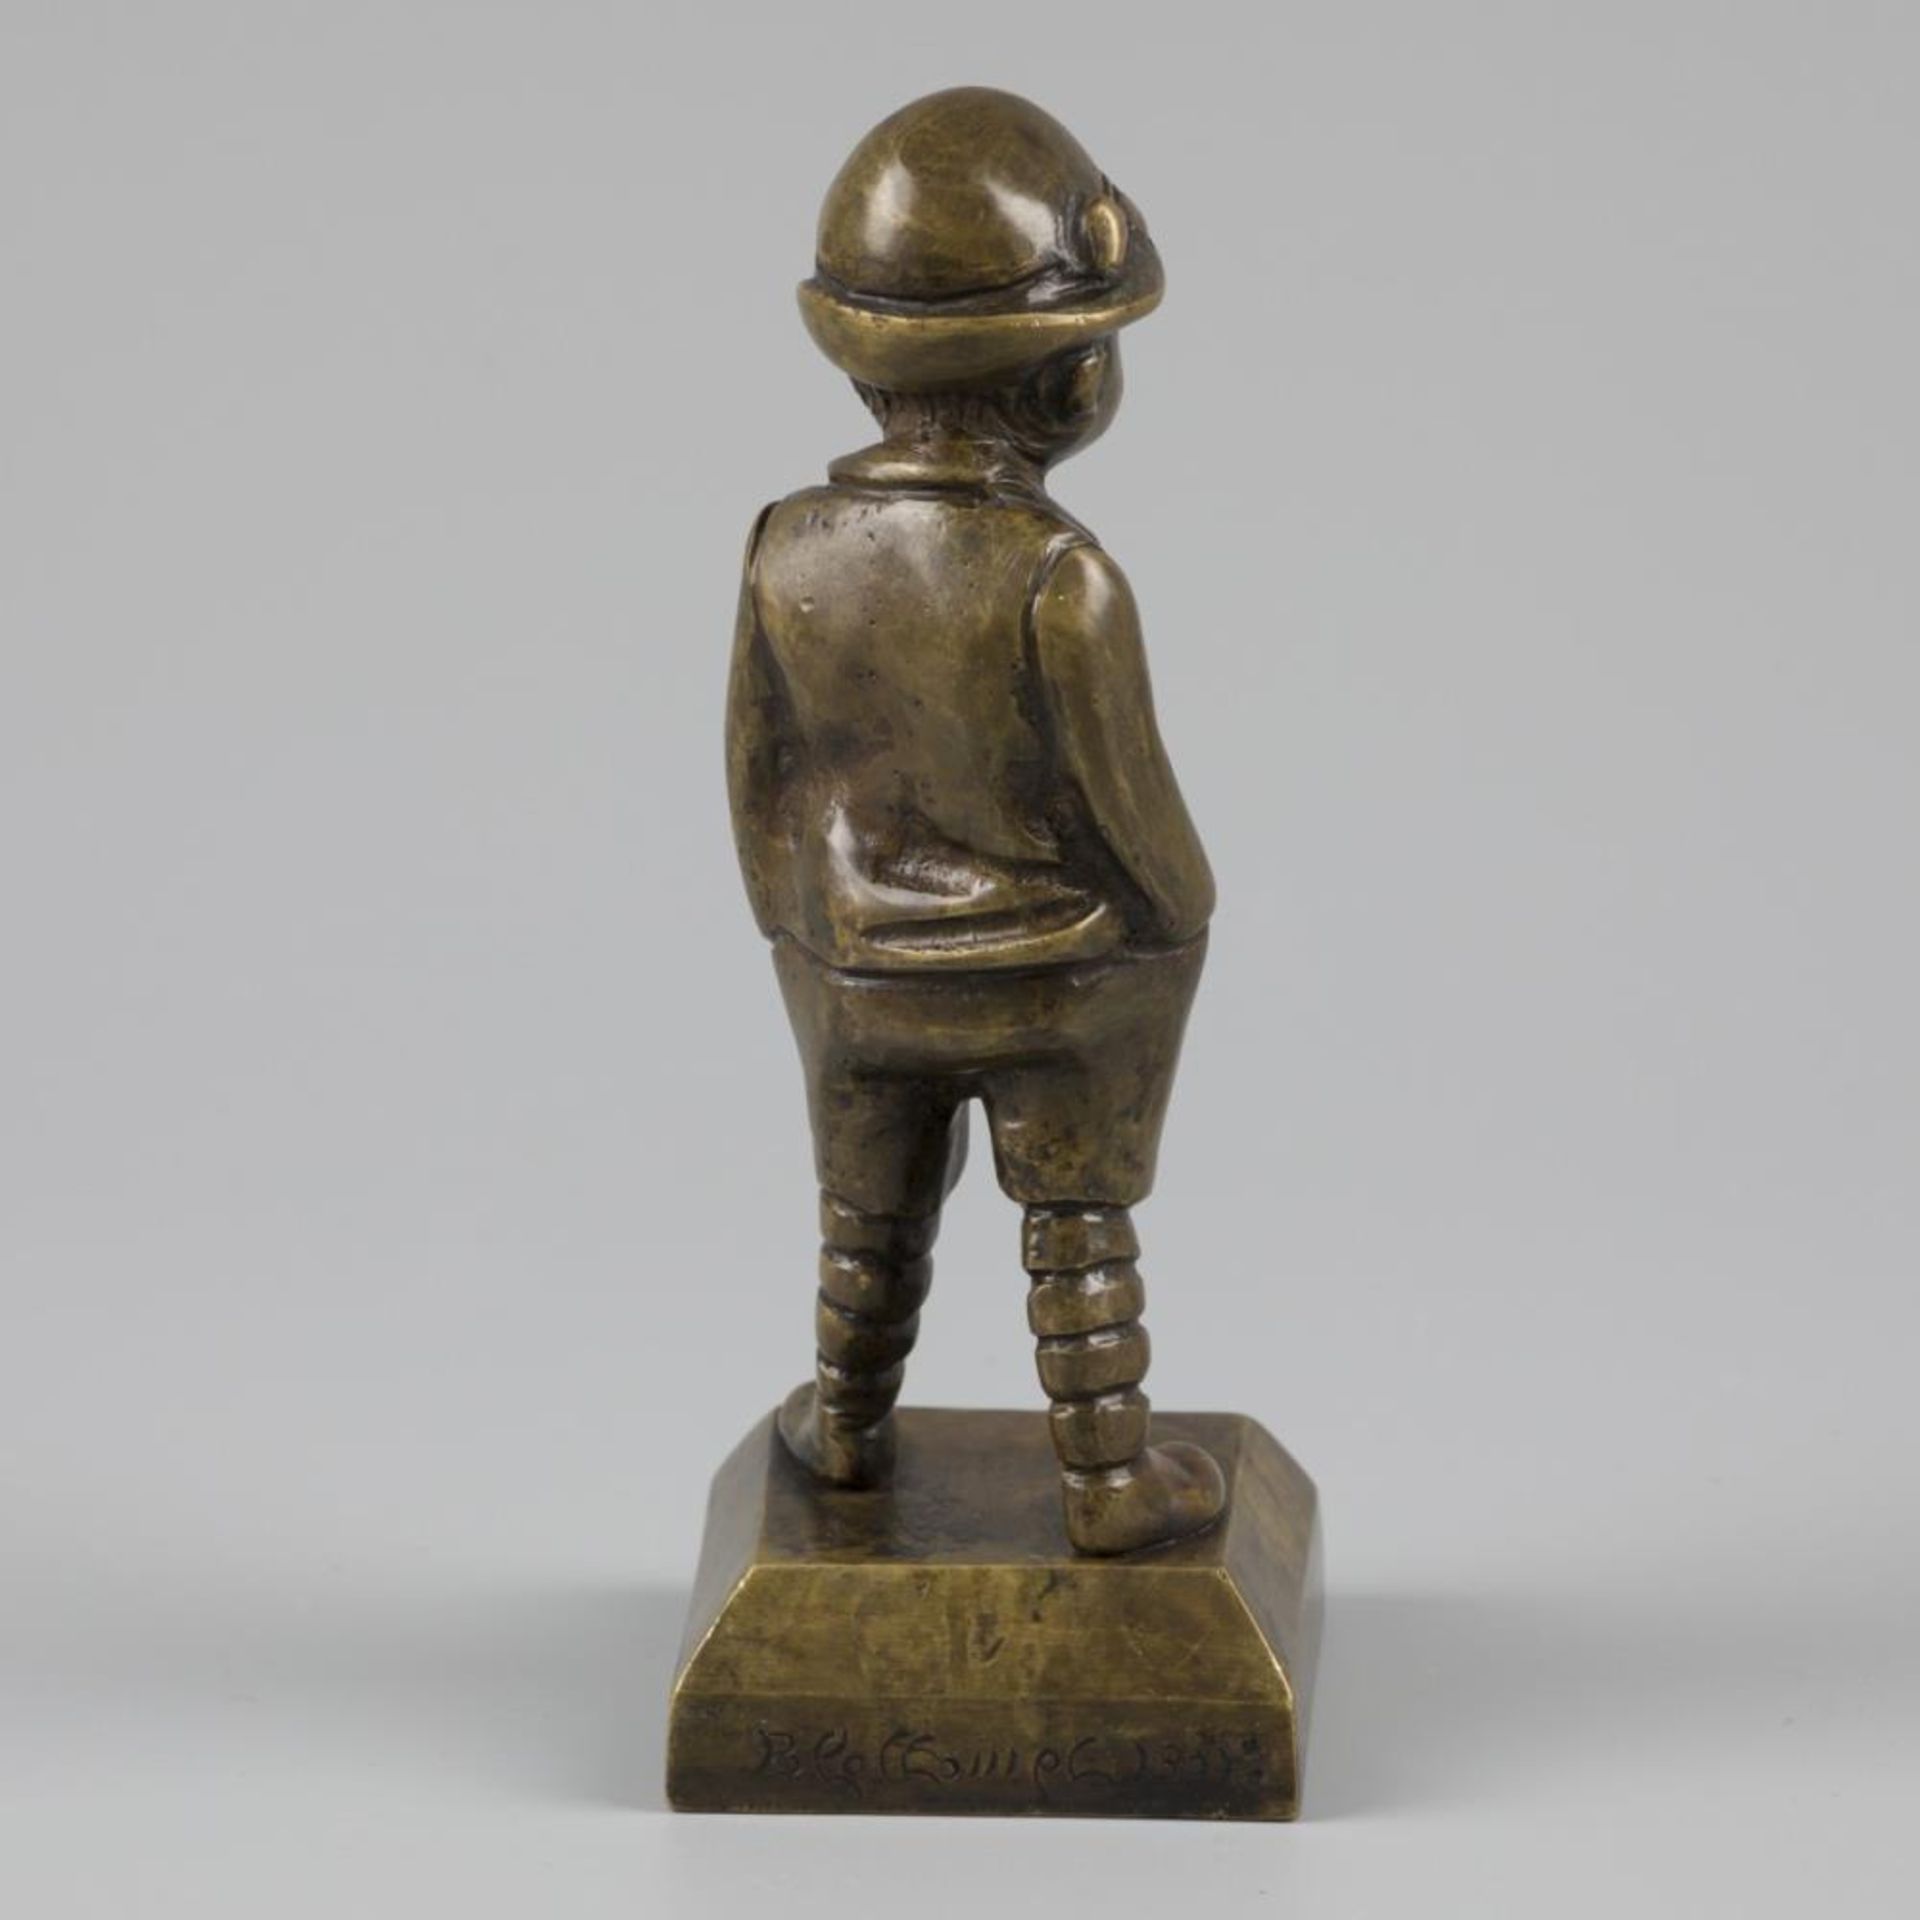 A bronze sculpture of a toddler with his hands in his pockets, Belgium, ca. 1920. - Image 3 of 6